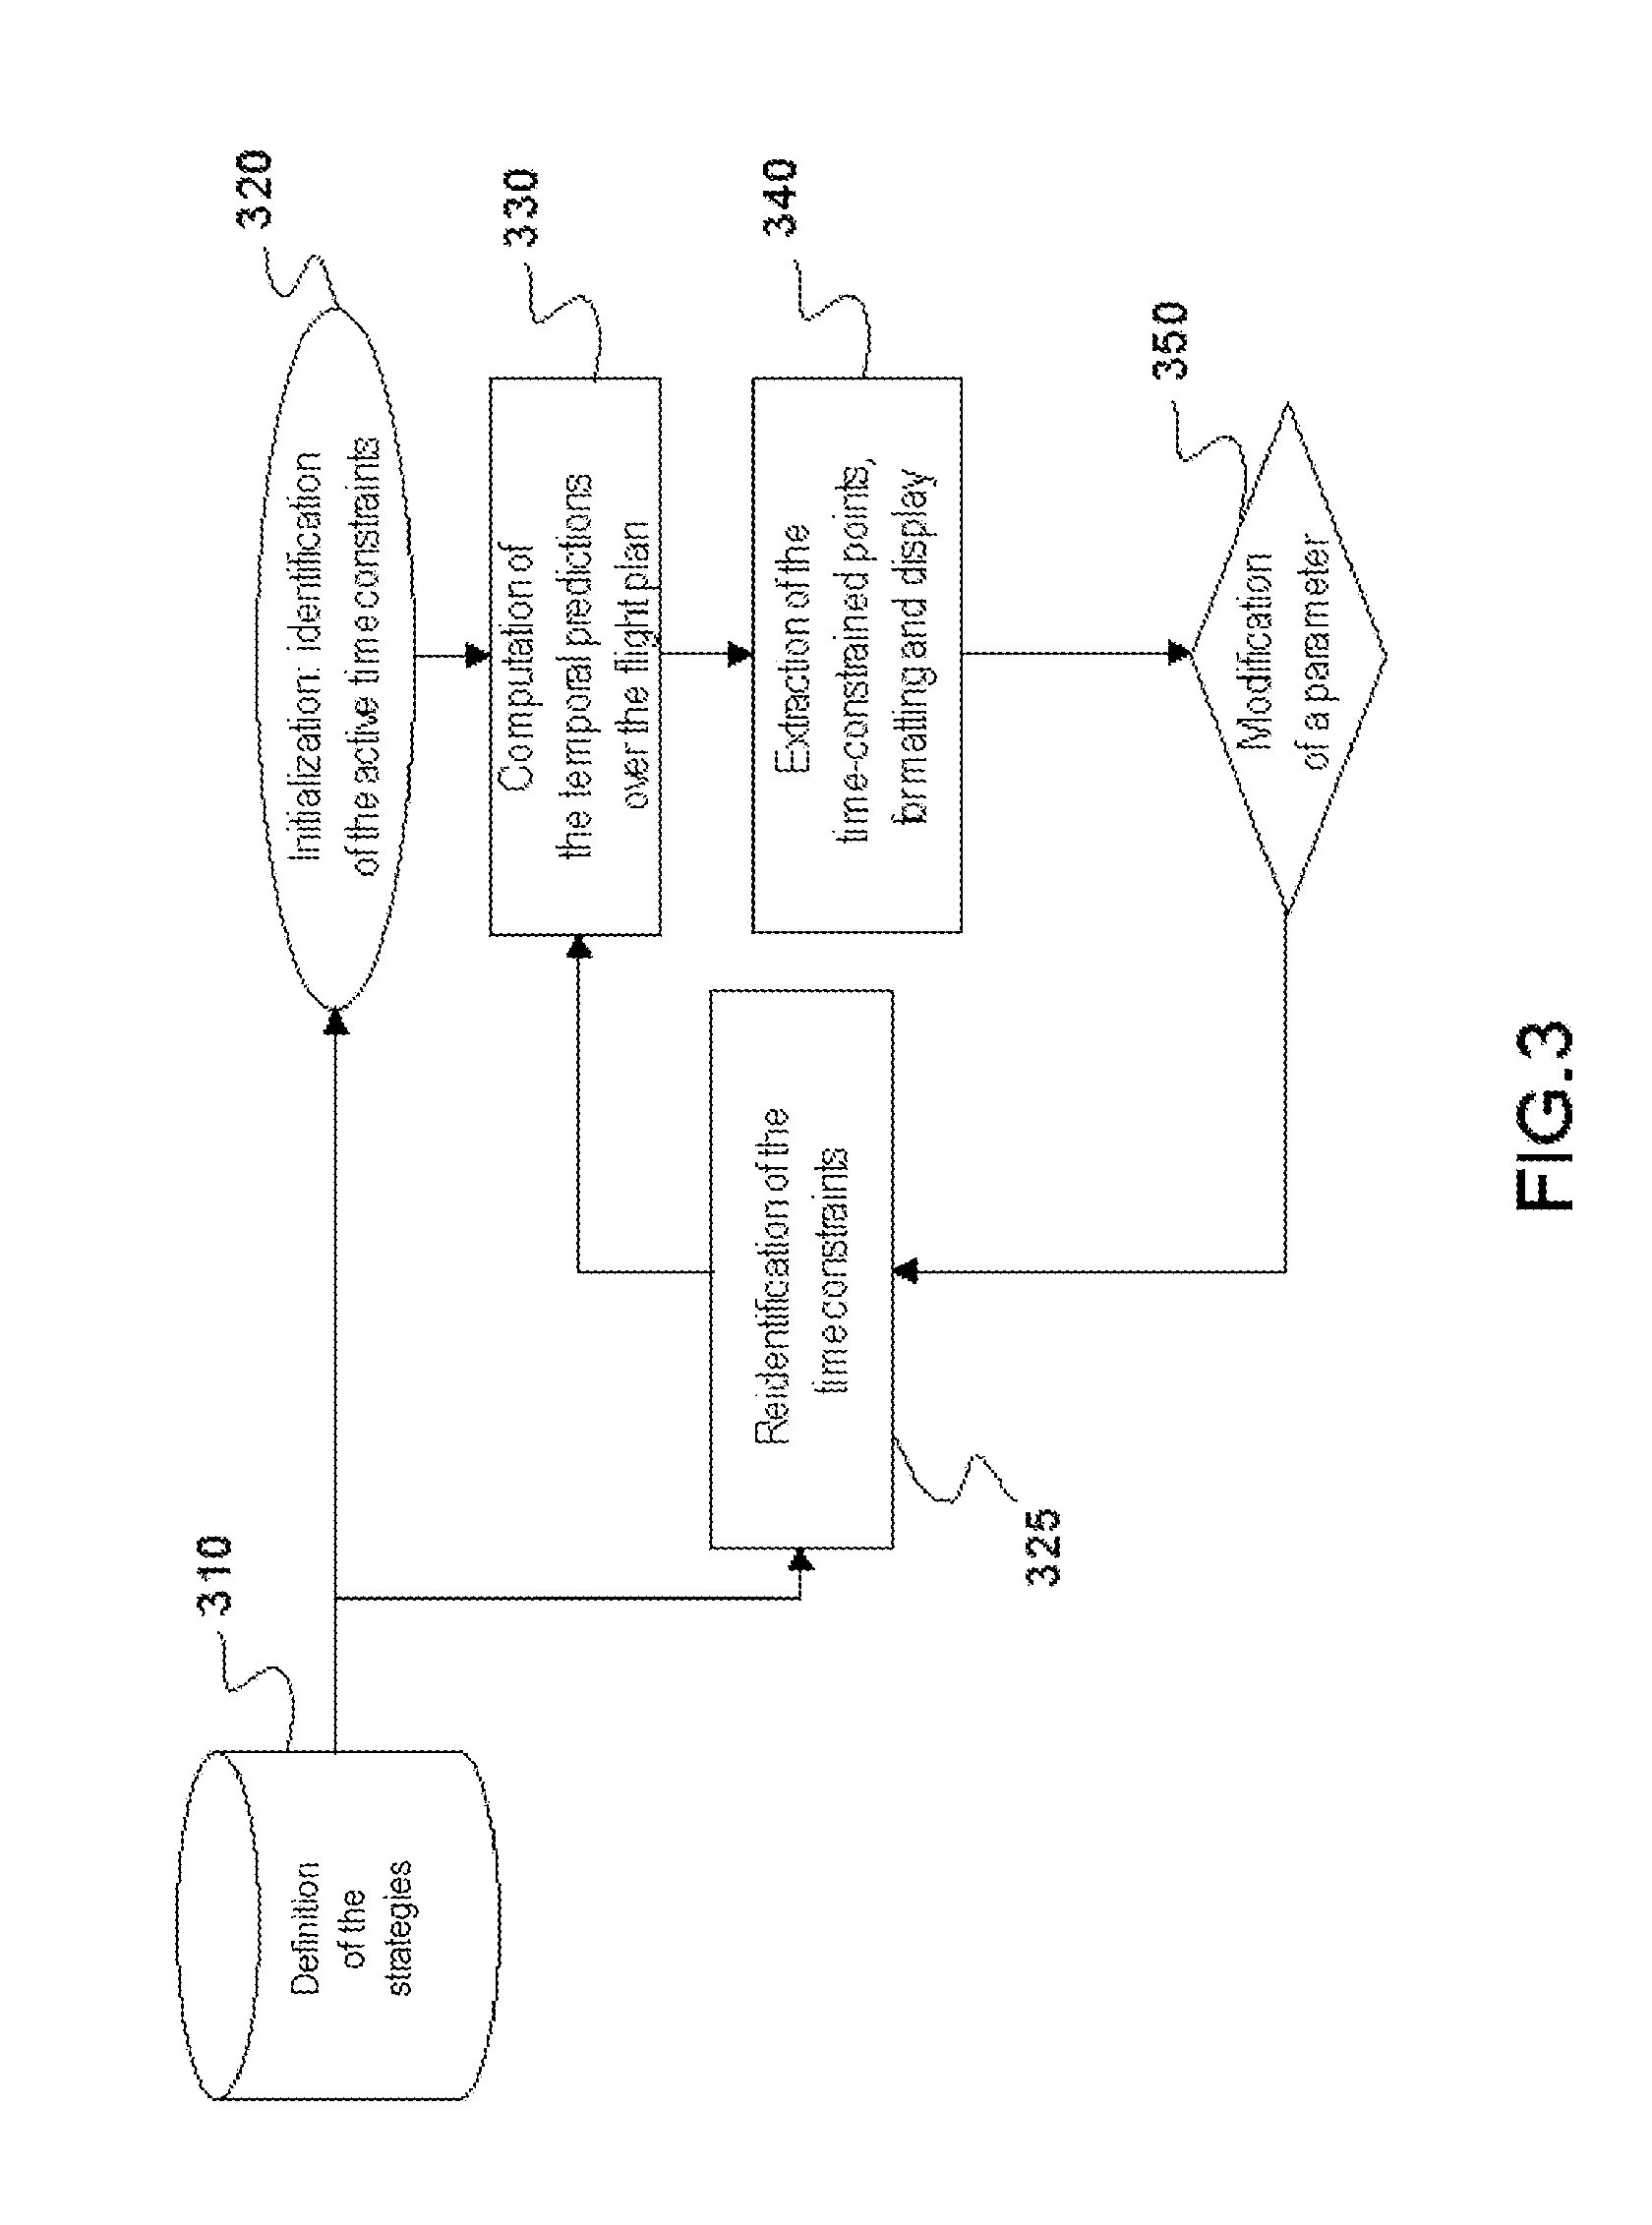 Flight management device for an aircraft adapted to the handling of multiple time constraints and corresponding method